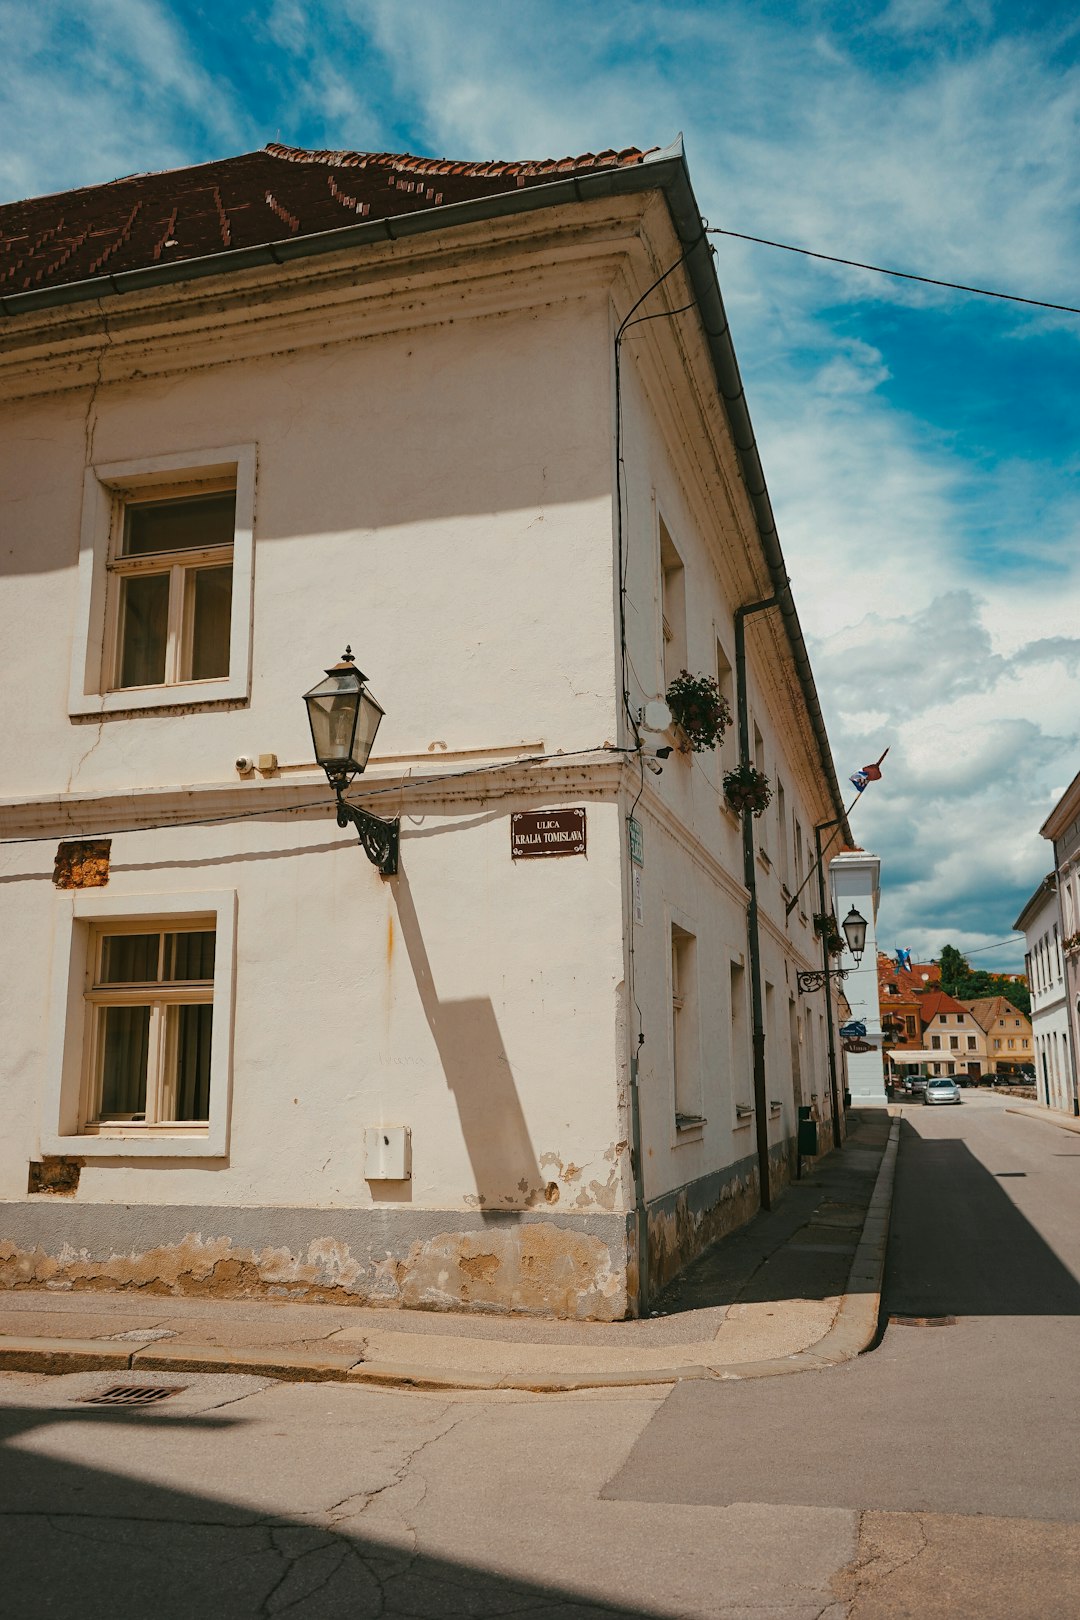 Travel Tips and Stories of Karlovac in Croatia